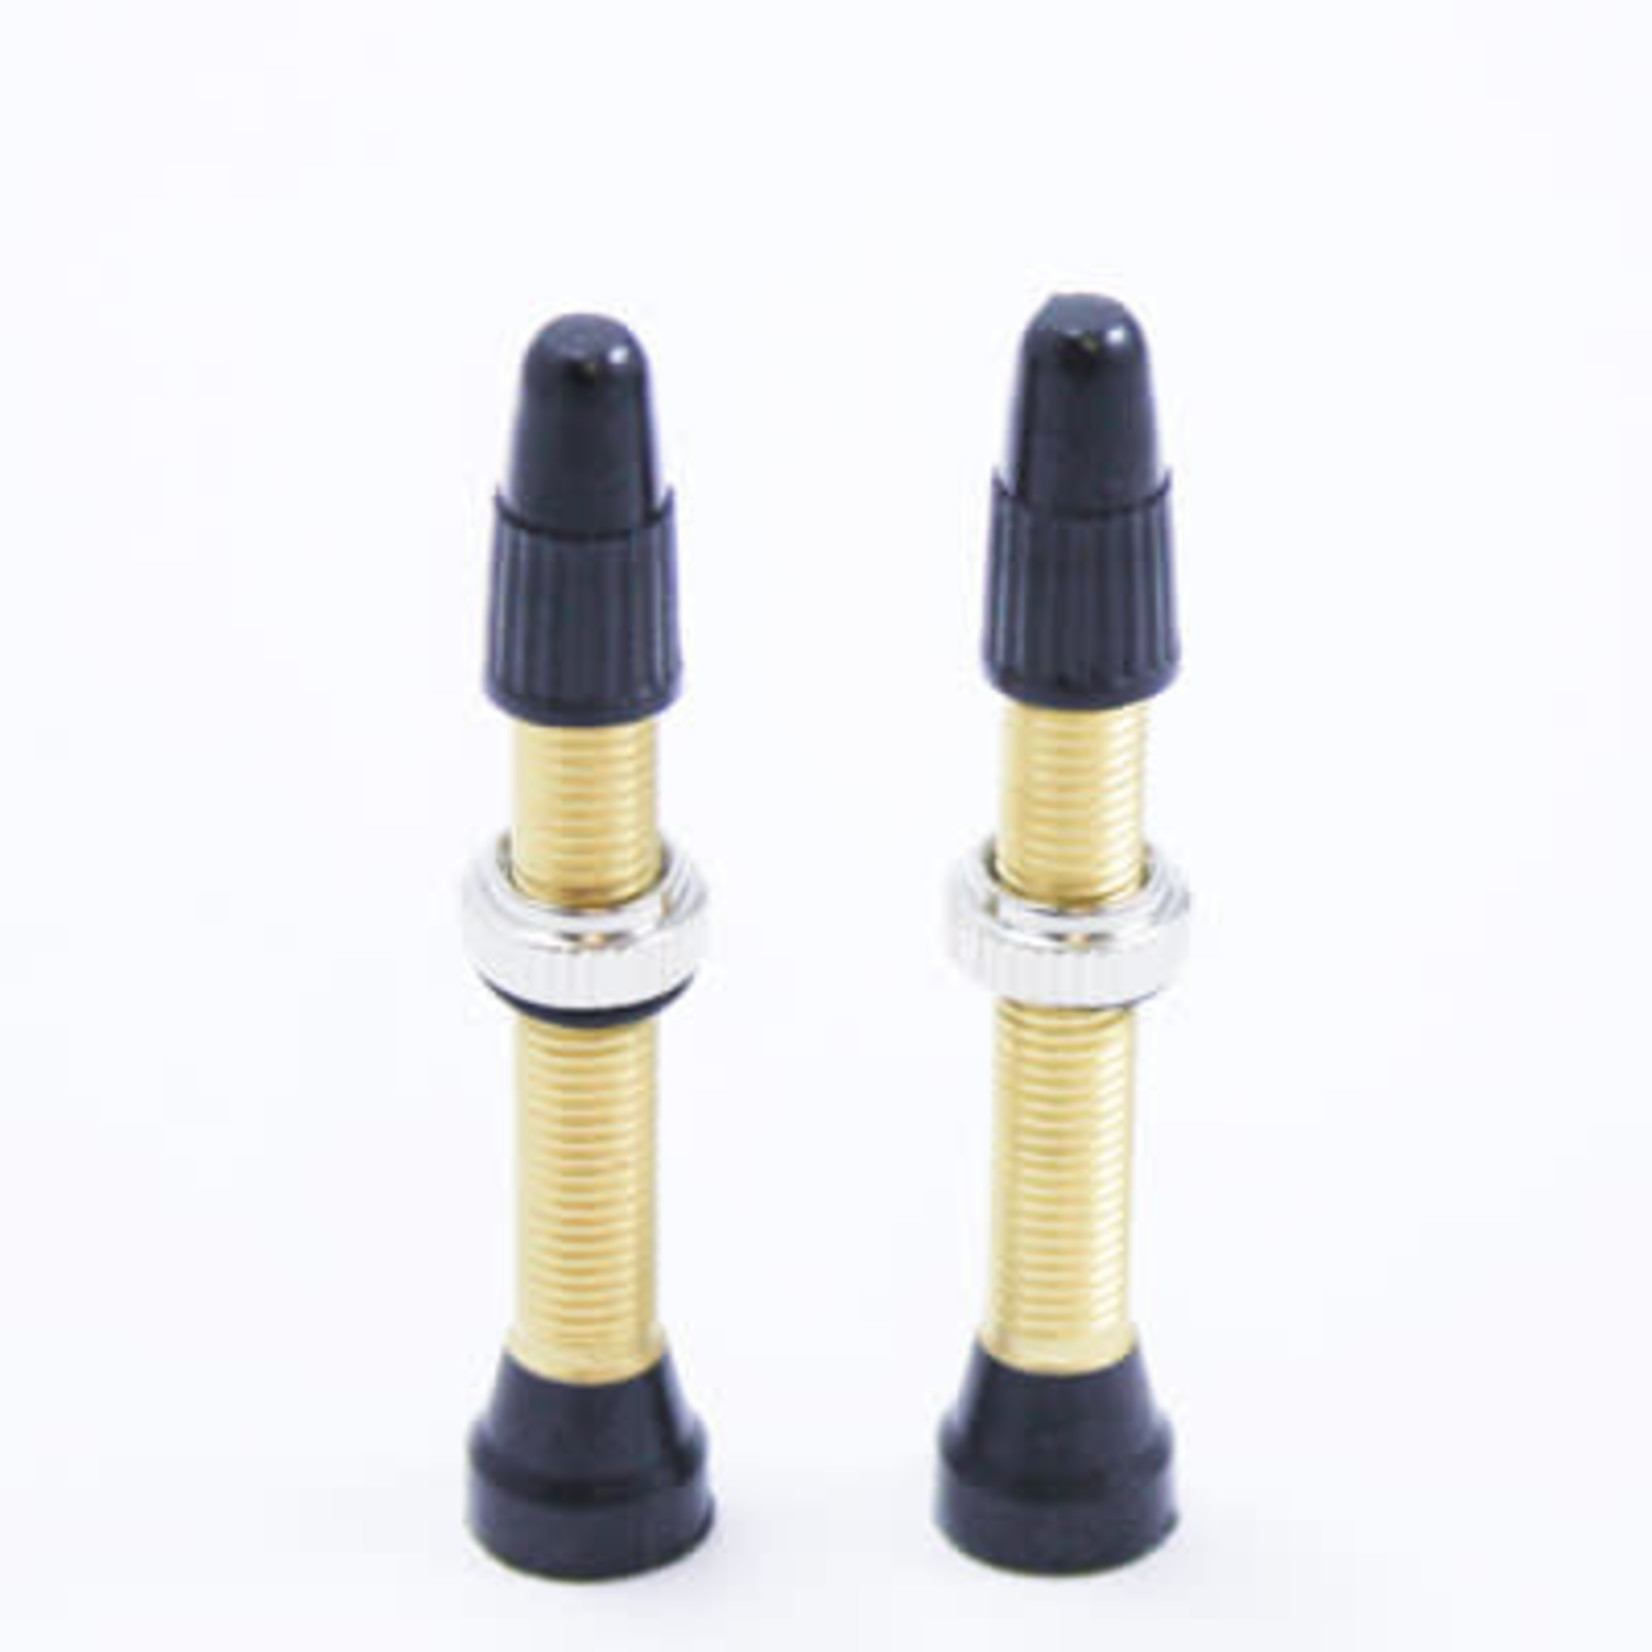 ULTRACYCLE KHS UC TUBELESS VALVES, 36mm BRASS, PAIR